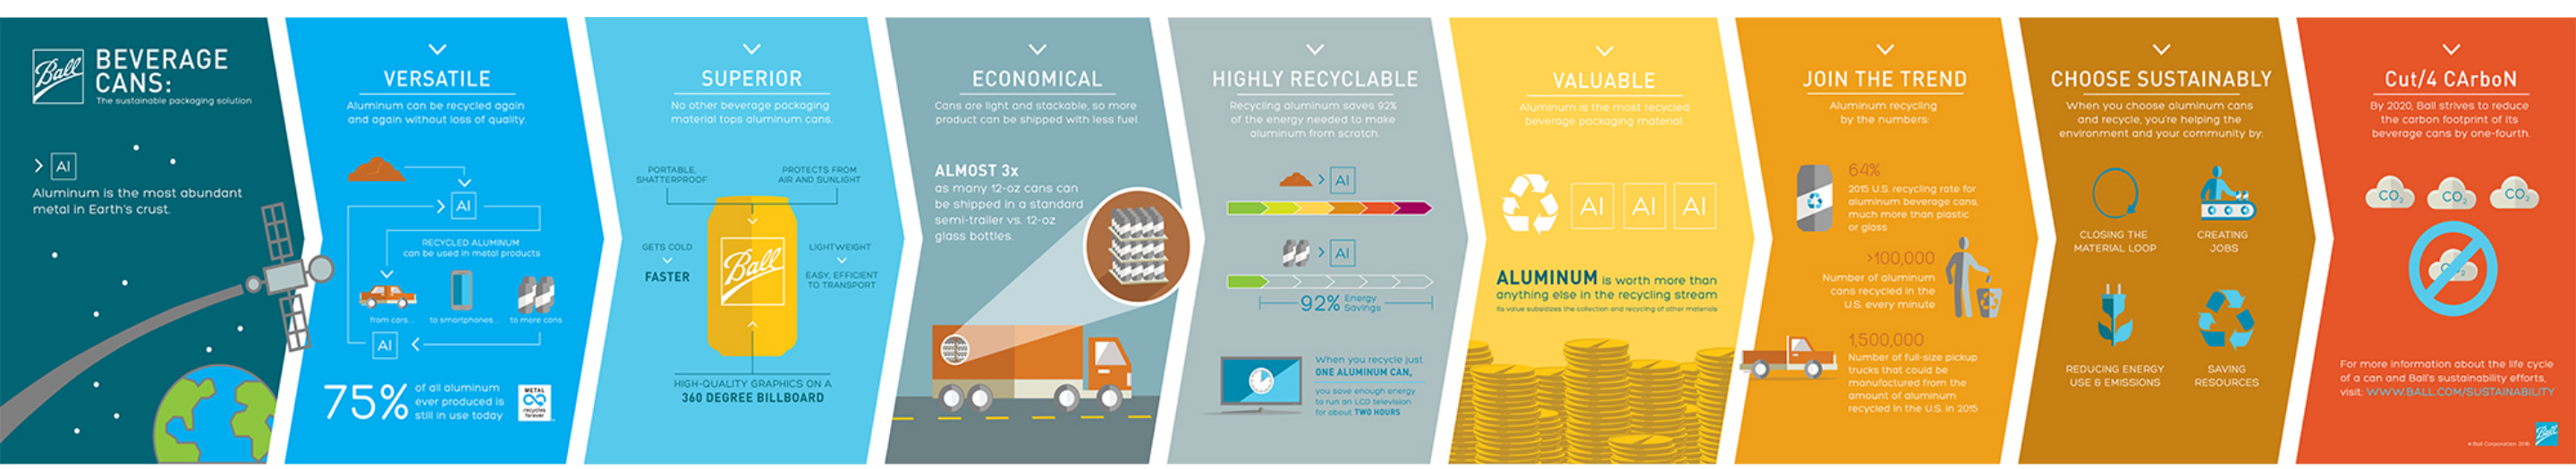 Ball aluminum can sustainability infographic - aluminum is the most abundant metal on Earth's crust, it's versatile, superior, economical, highly recyclable, and valuable